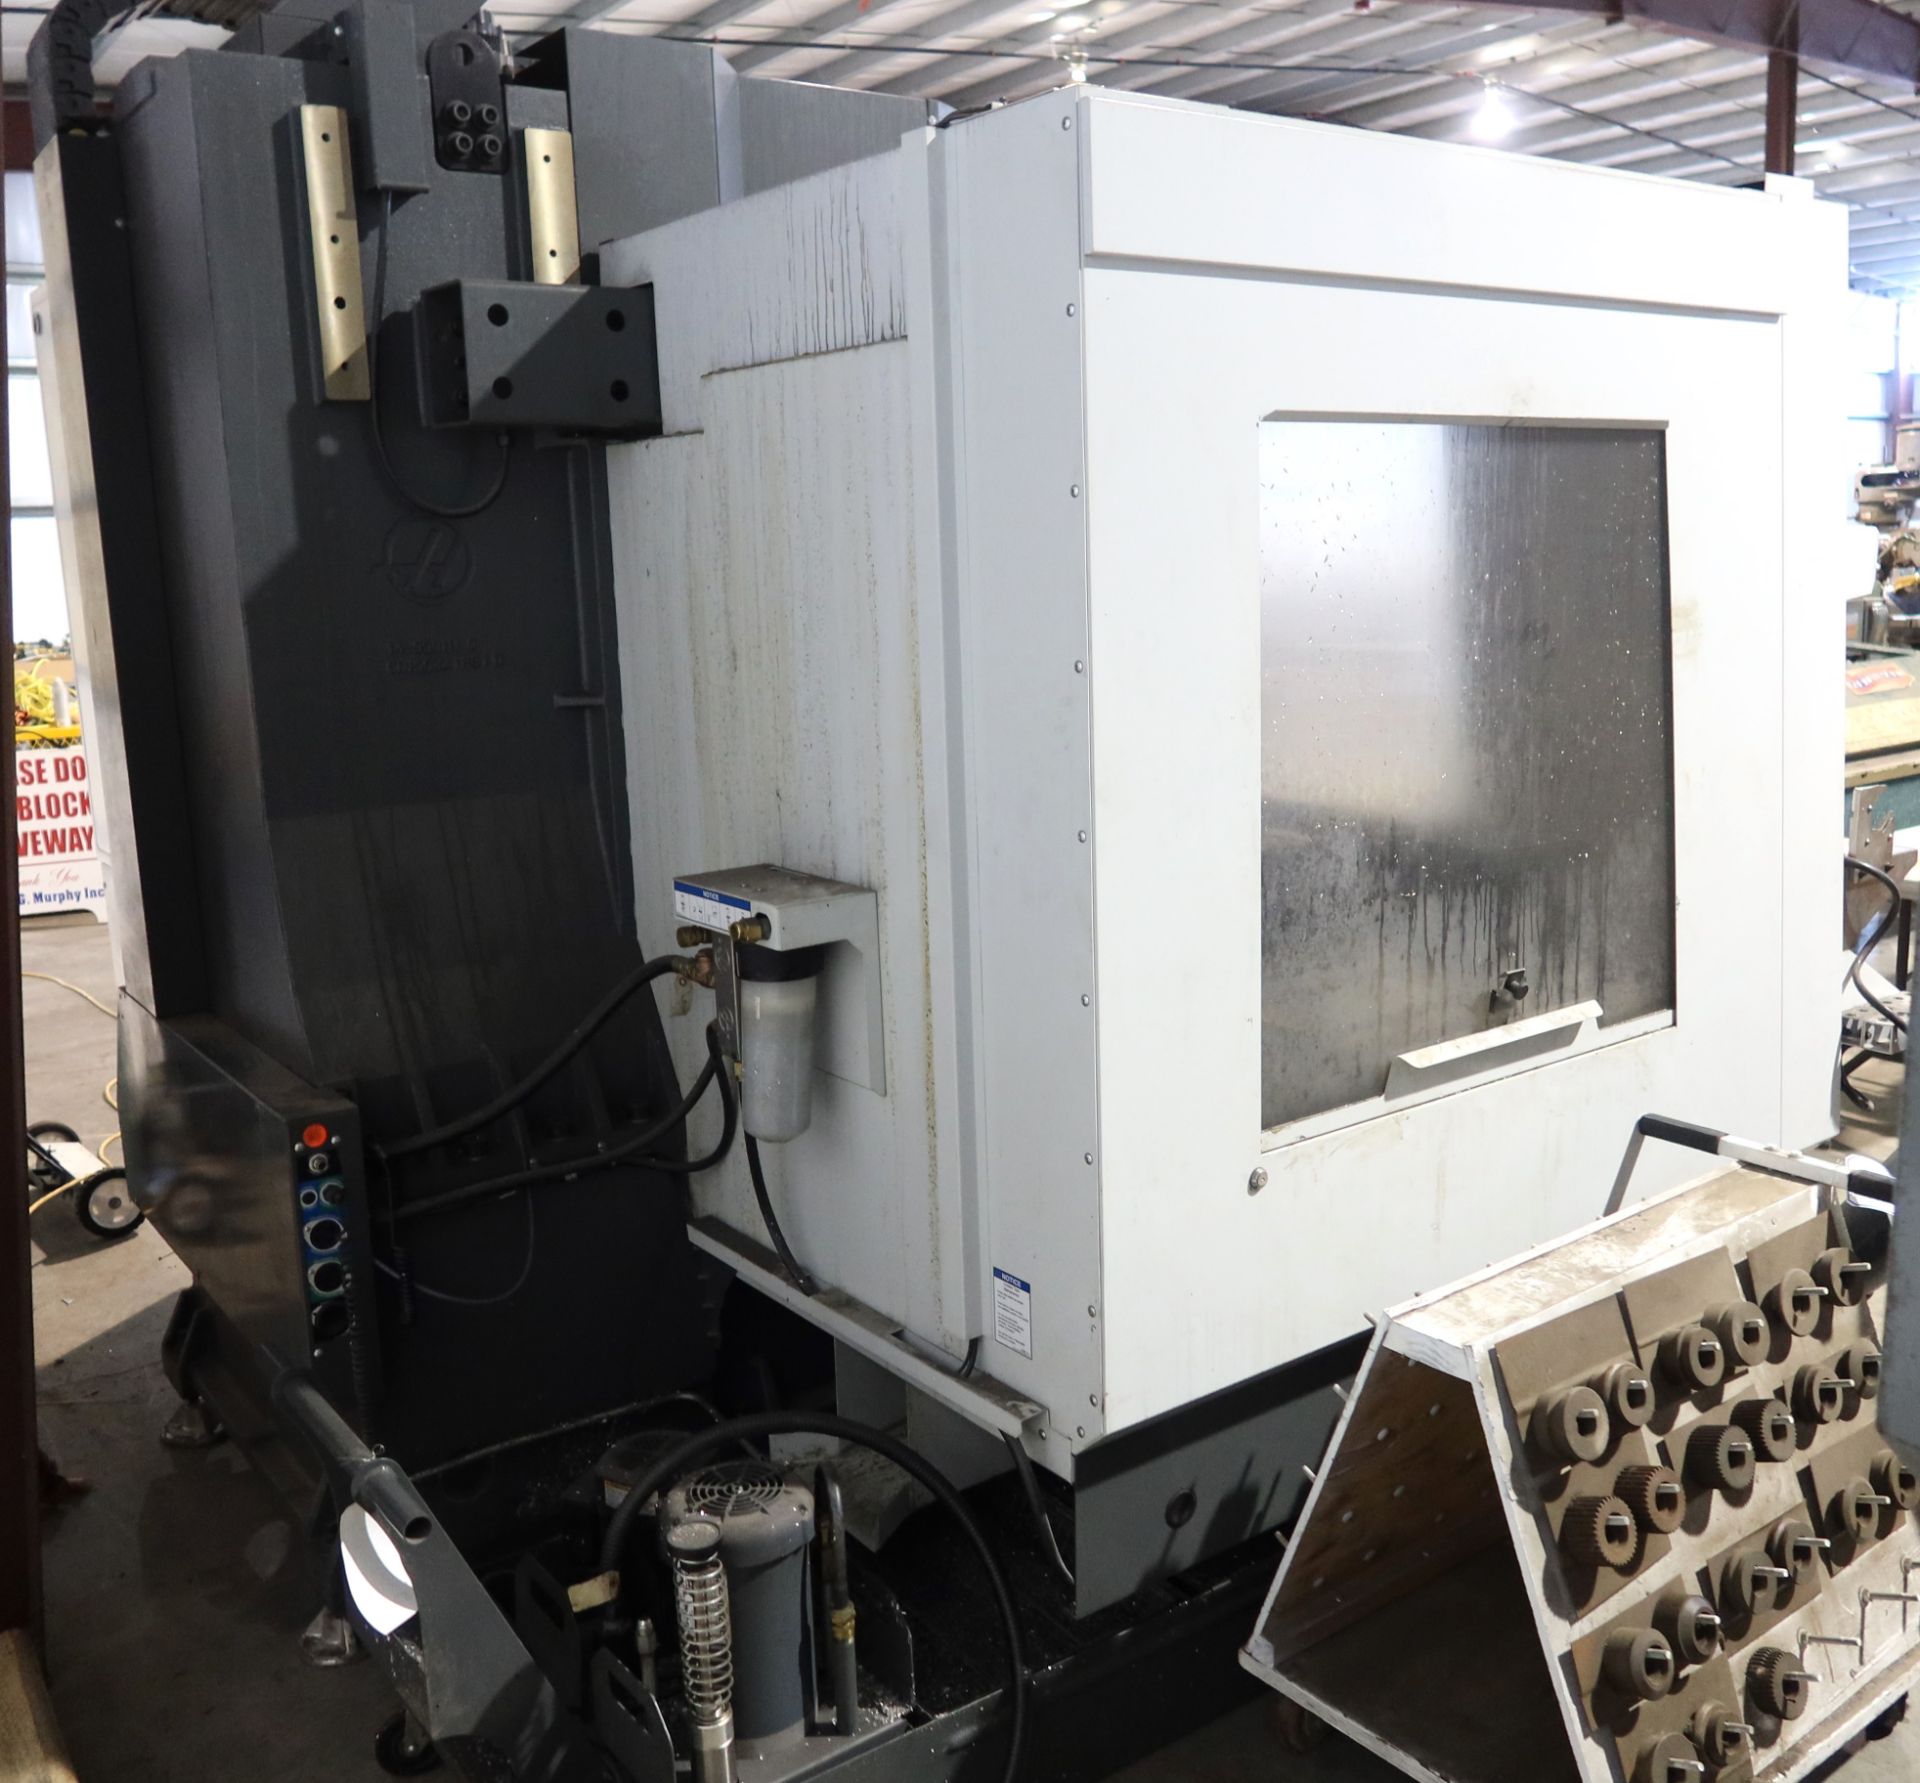 HAAS VF3-YT CNC 4-AXIS PRECISION VERTICAL MACHINING CENTER, S/N 1124918, NEW 2015 - Image 8 of 12